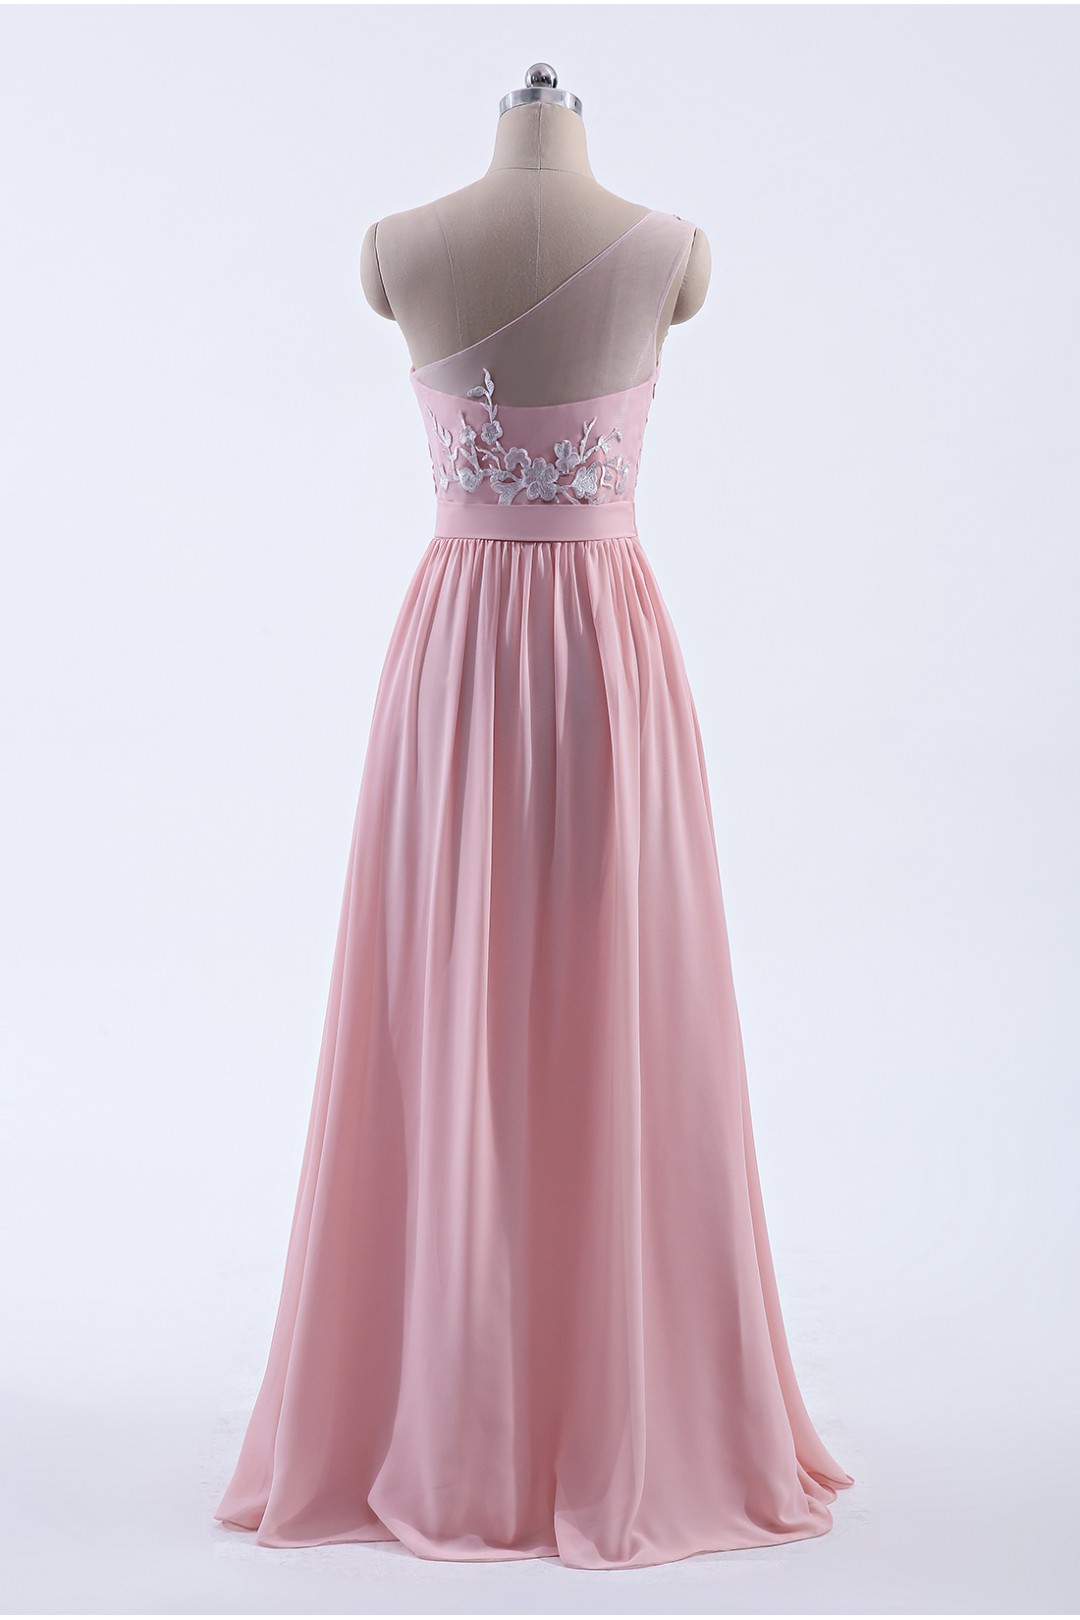 Clearance | Illusion Sweetheart One Shoulder Tulle A-Line Bridesmaid Dress